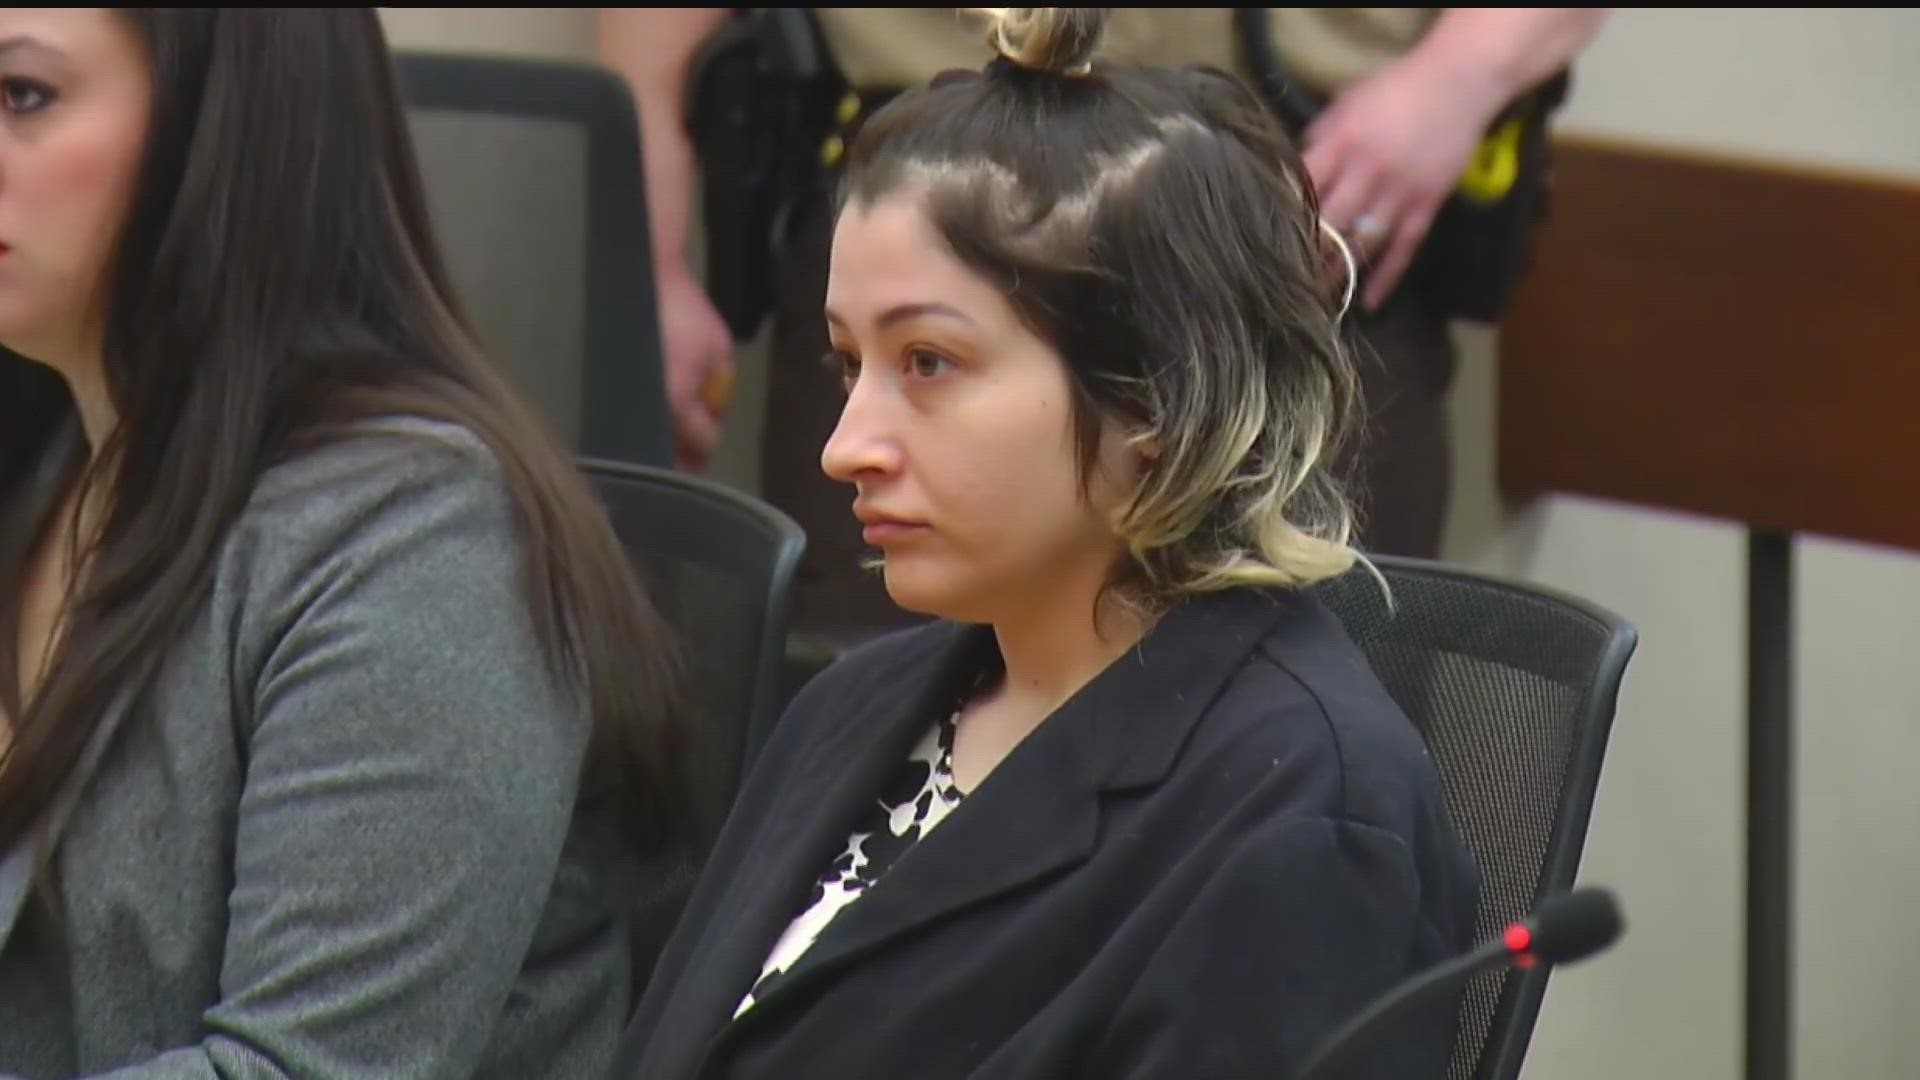 Jurors found Thaler guilty of shooting her 6-year-old son up to nine times with a shotgun while in the midst of a custody dispute.